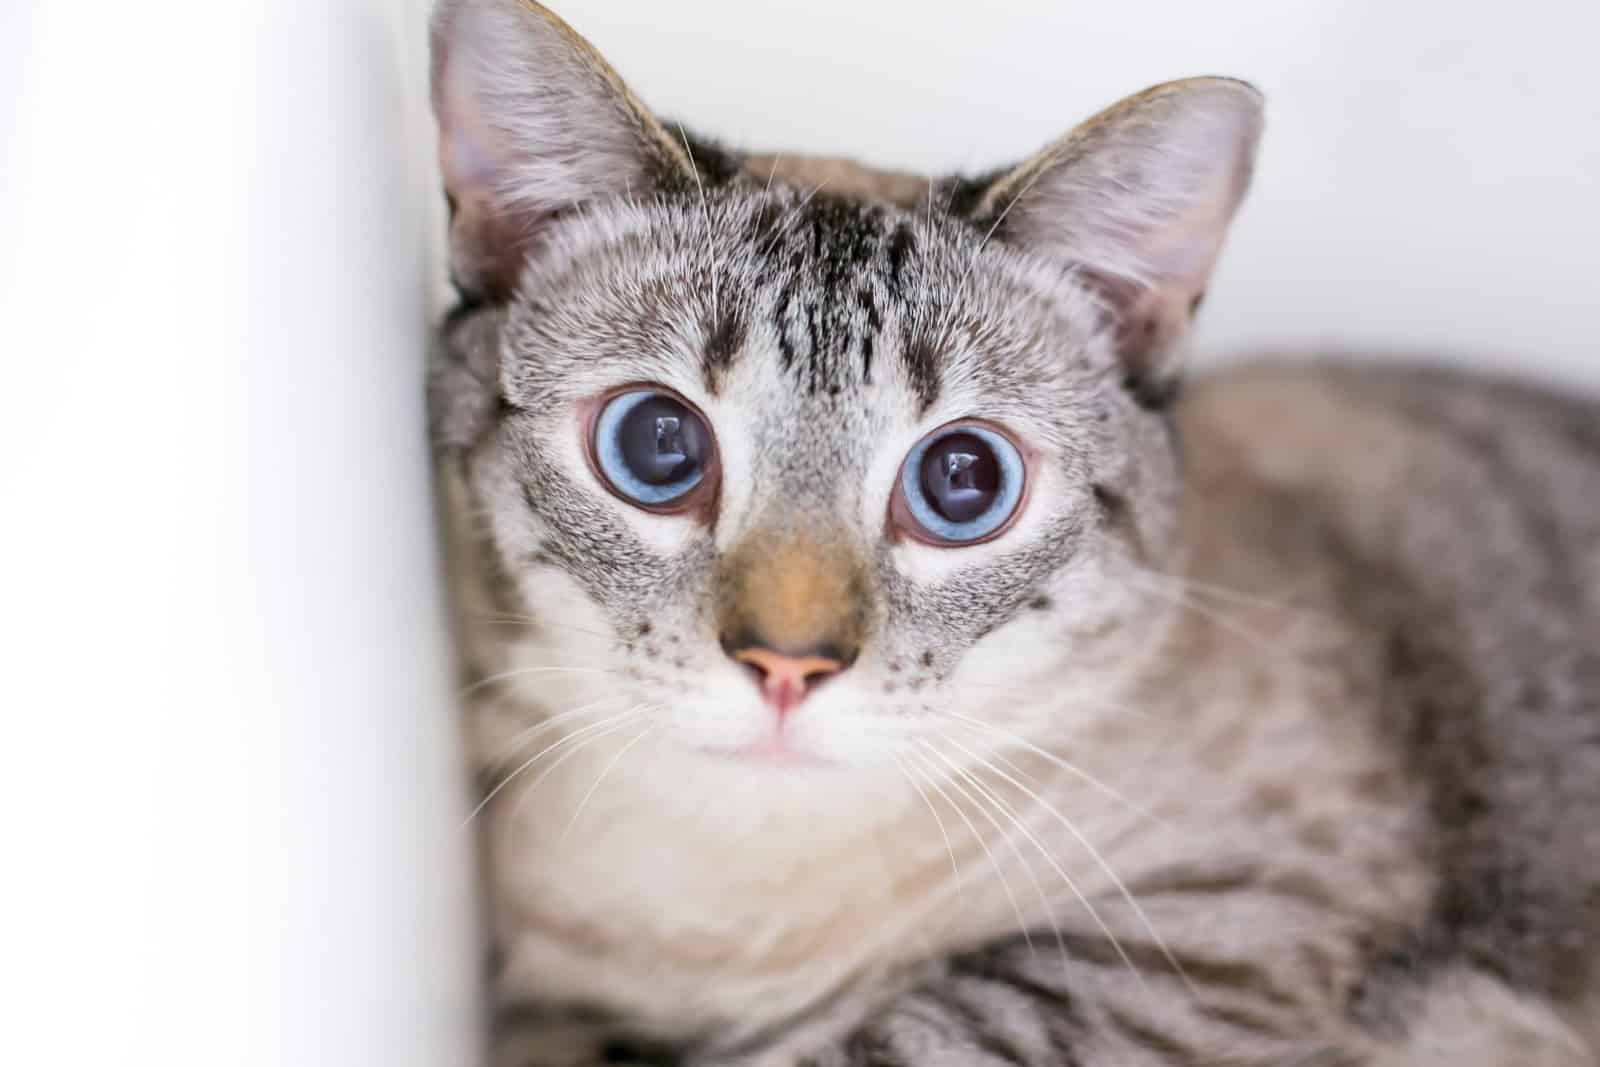 A slightly cross-eyed domestic shorthair cat with a nervous expression and dilated pupils